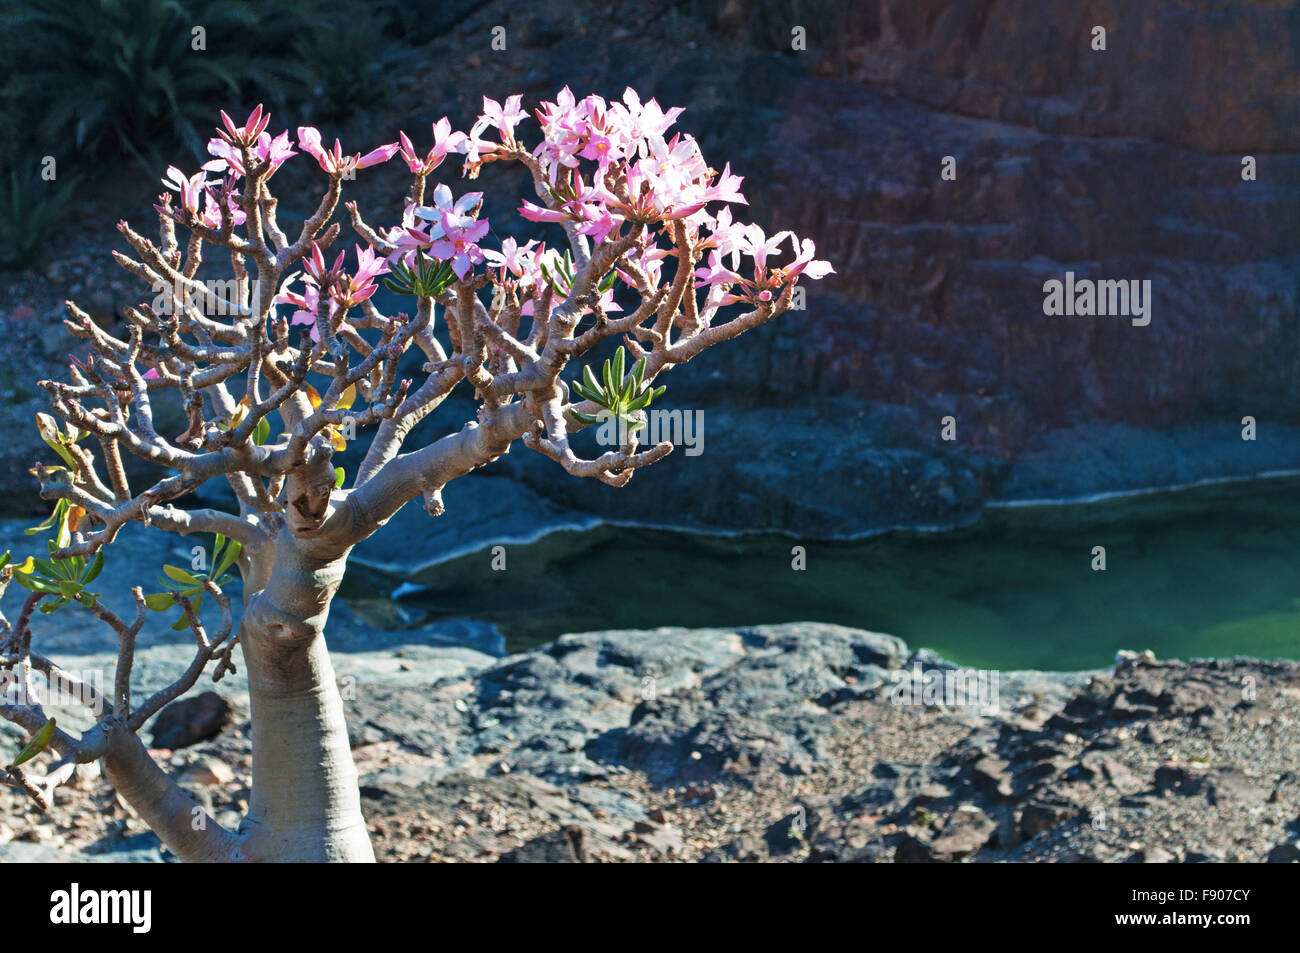 Yemen, Middle East: a flowering Bottle tree at dawn in the area of the wadi of Dirhur, a nature reserve in the highlands of the island of Socotra Stock Photo